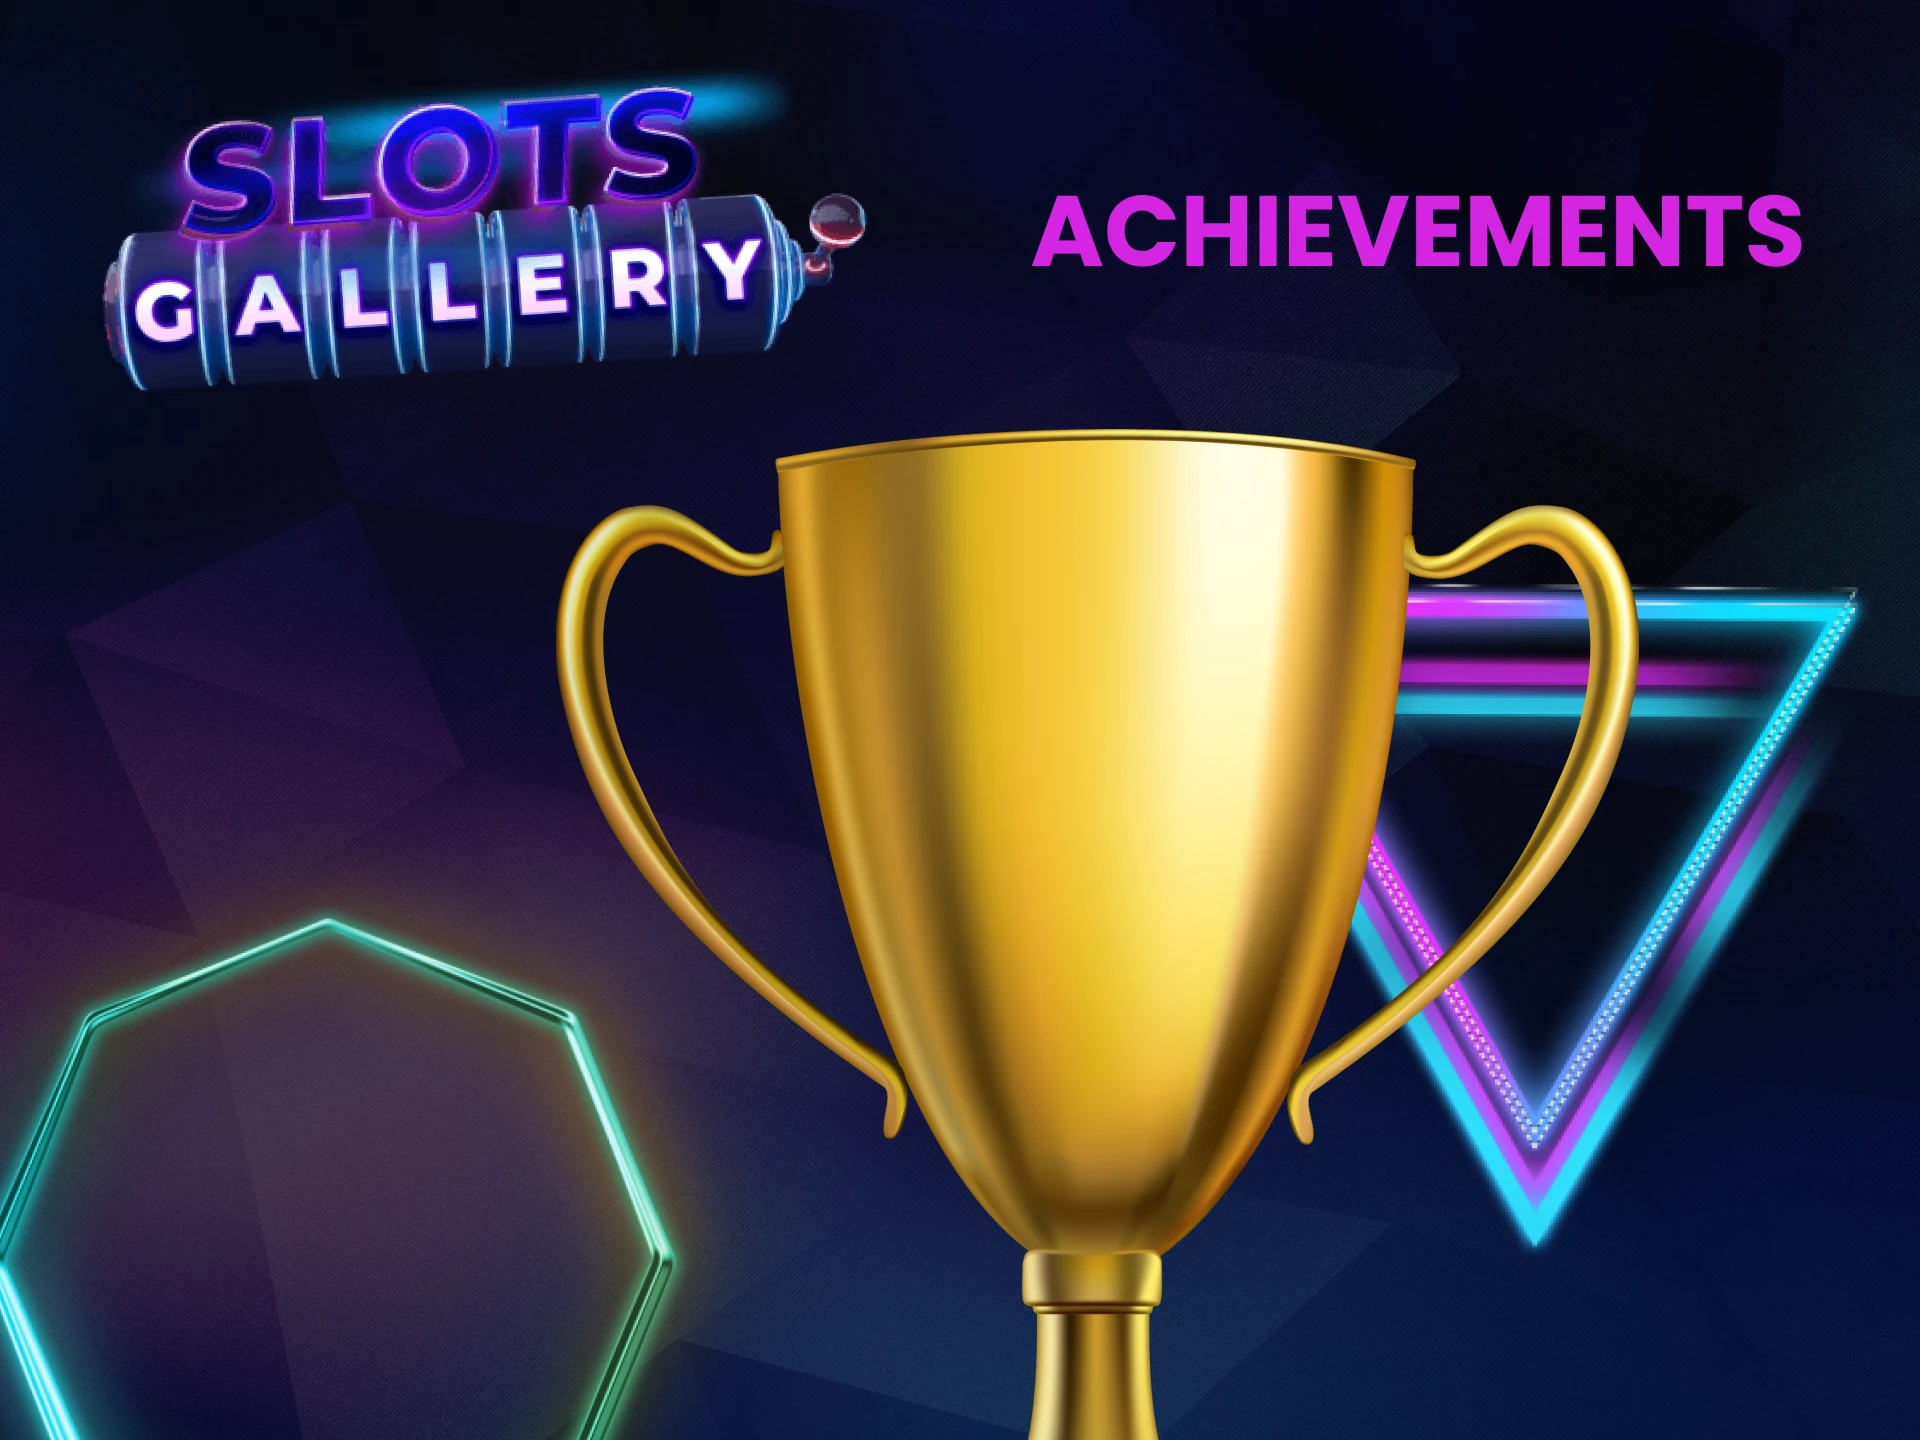 Find out what successes the Slots Gallery service has already achieved.